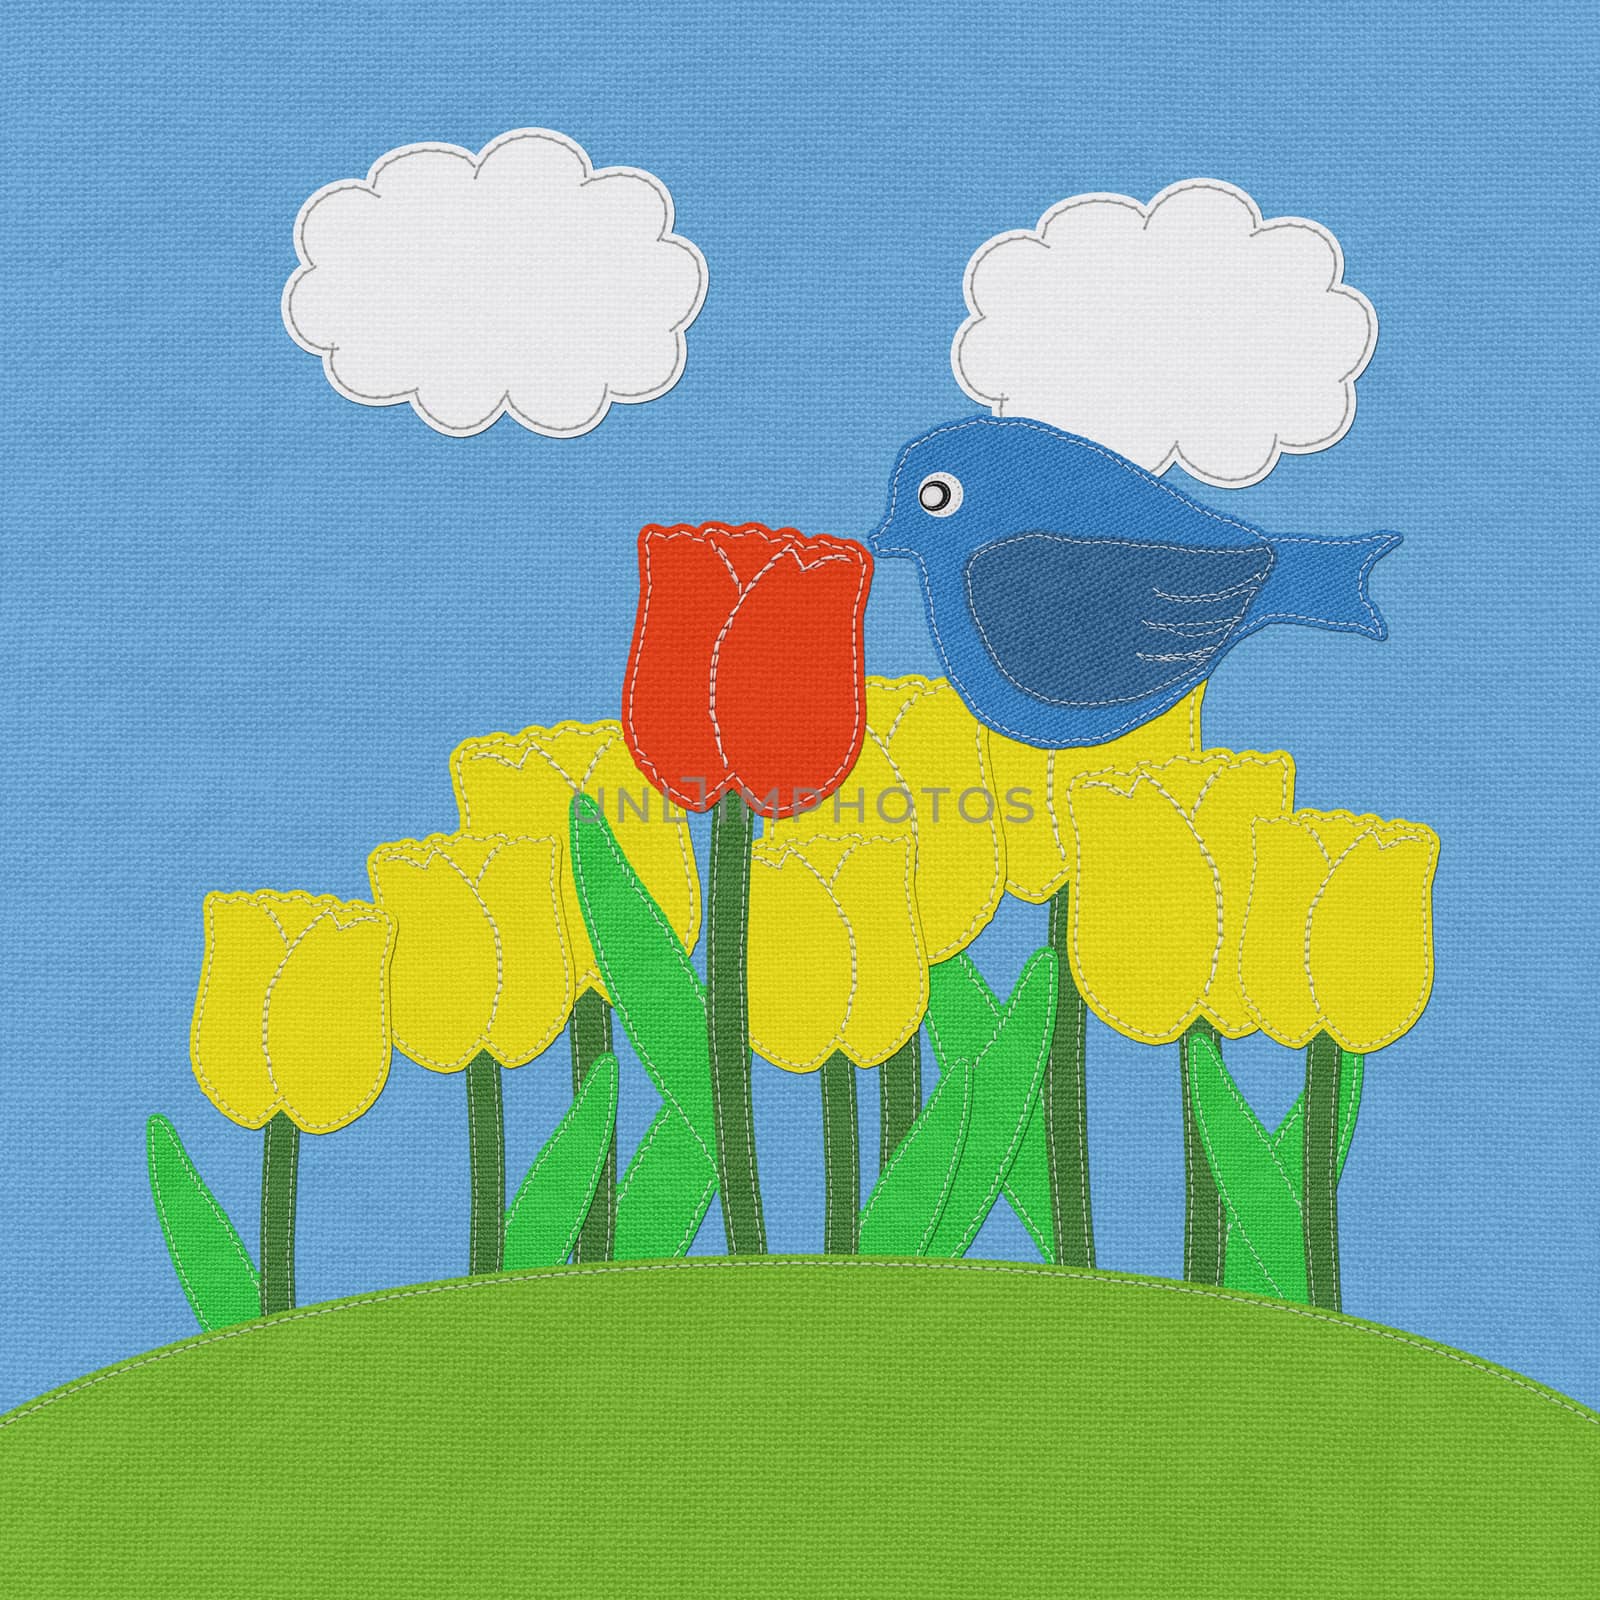 Tulip on green grass field with stitch style fabric background